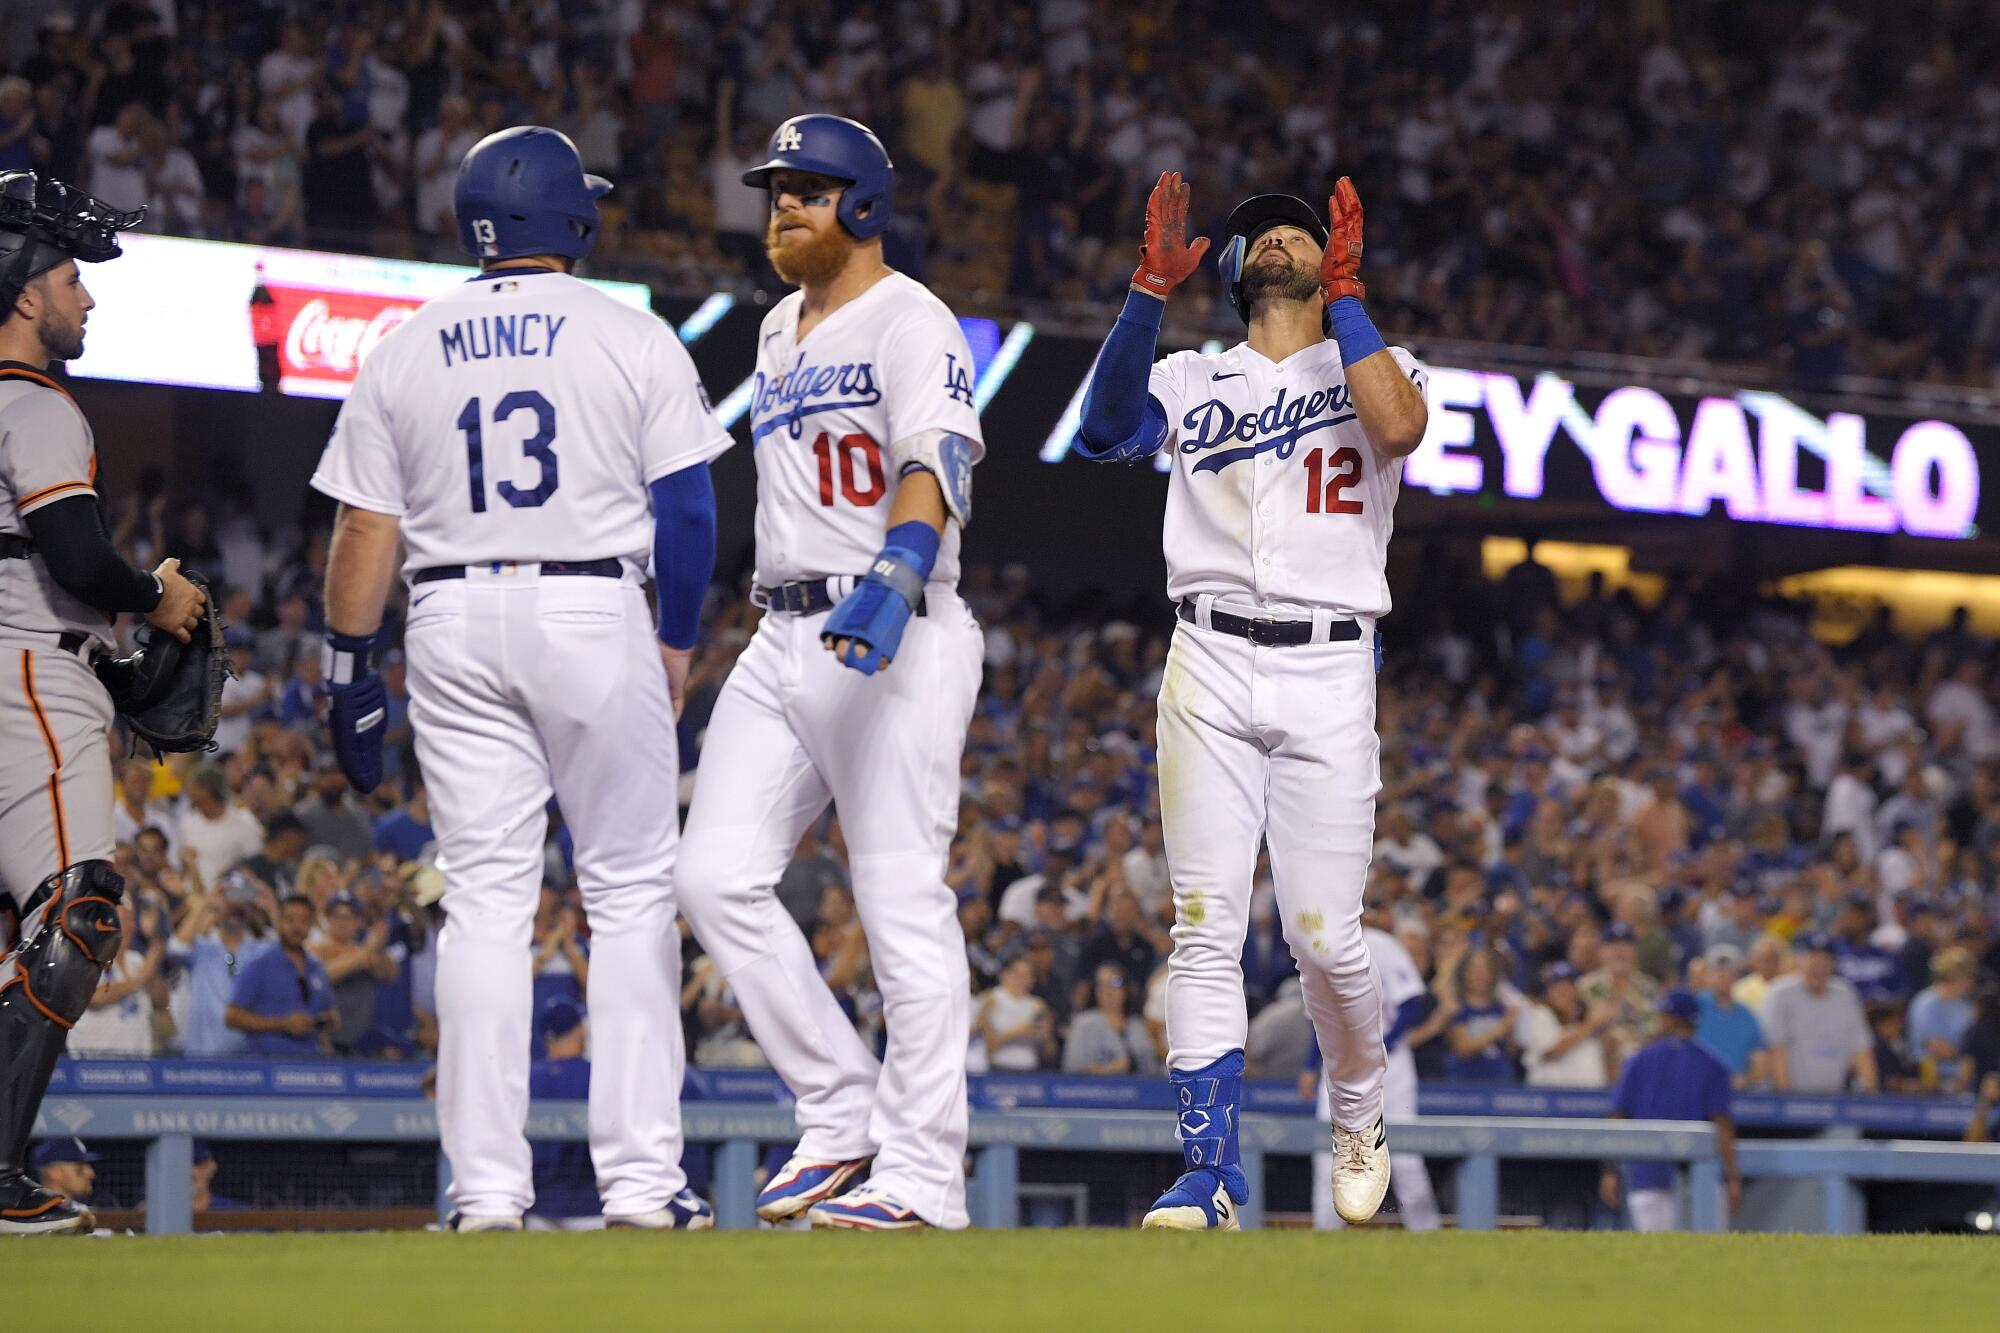 Joey Gallo, right, gestures as he scores after a three-run home run as Max Muncy and Justin Turner wait for him